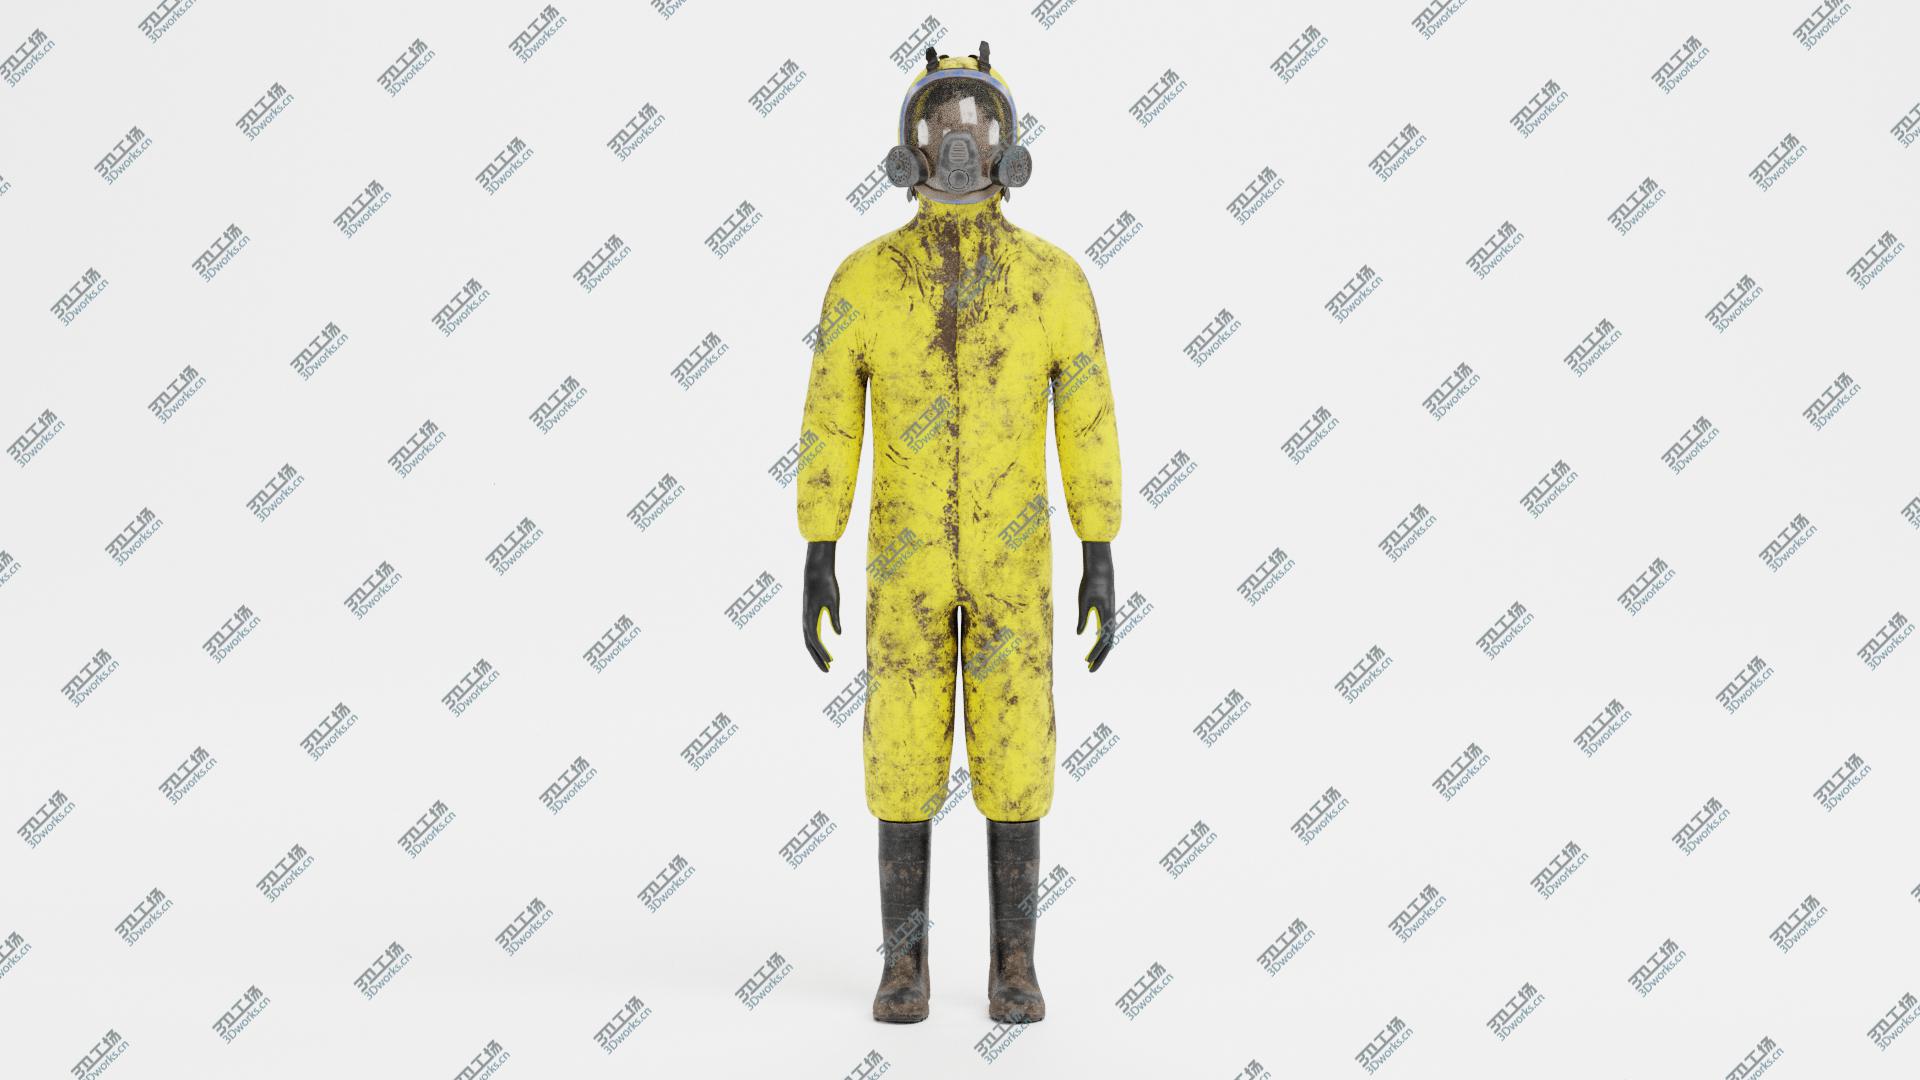 images/goods_img/202104093/3D Protective Suit 2 model/1.jpg